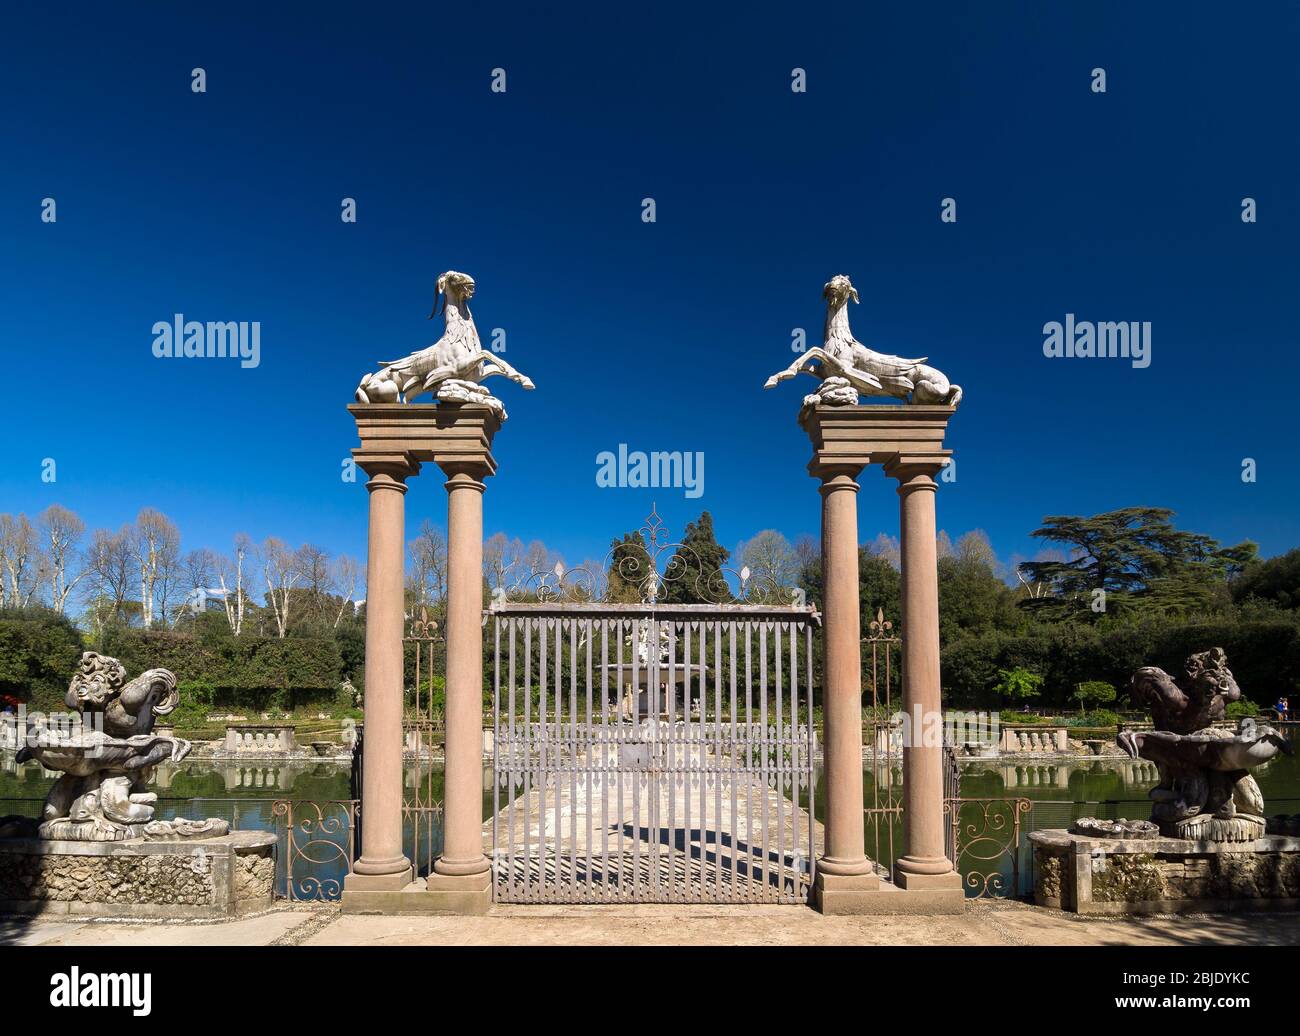 Gate with capricorns and harpys in Island Fountain (Vasca dell`Isola), Boboli Gardens, Florence, Tuscany, Italy. Unesco World Heritage site. Stock Photo